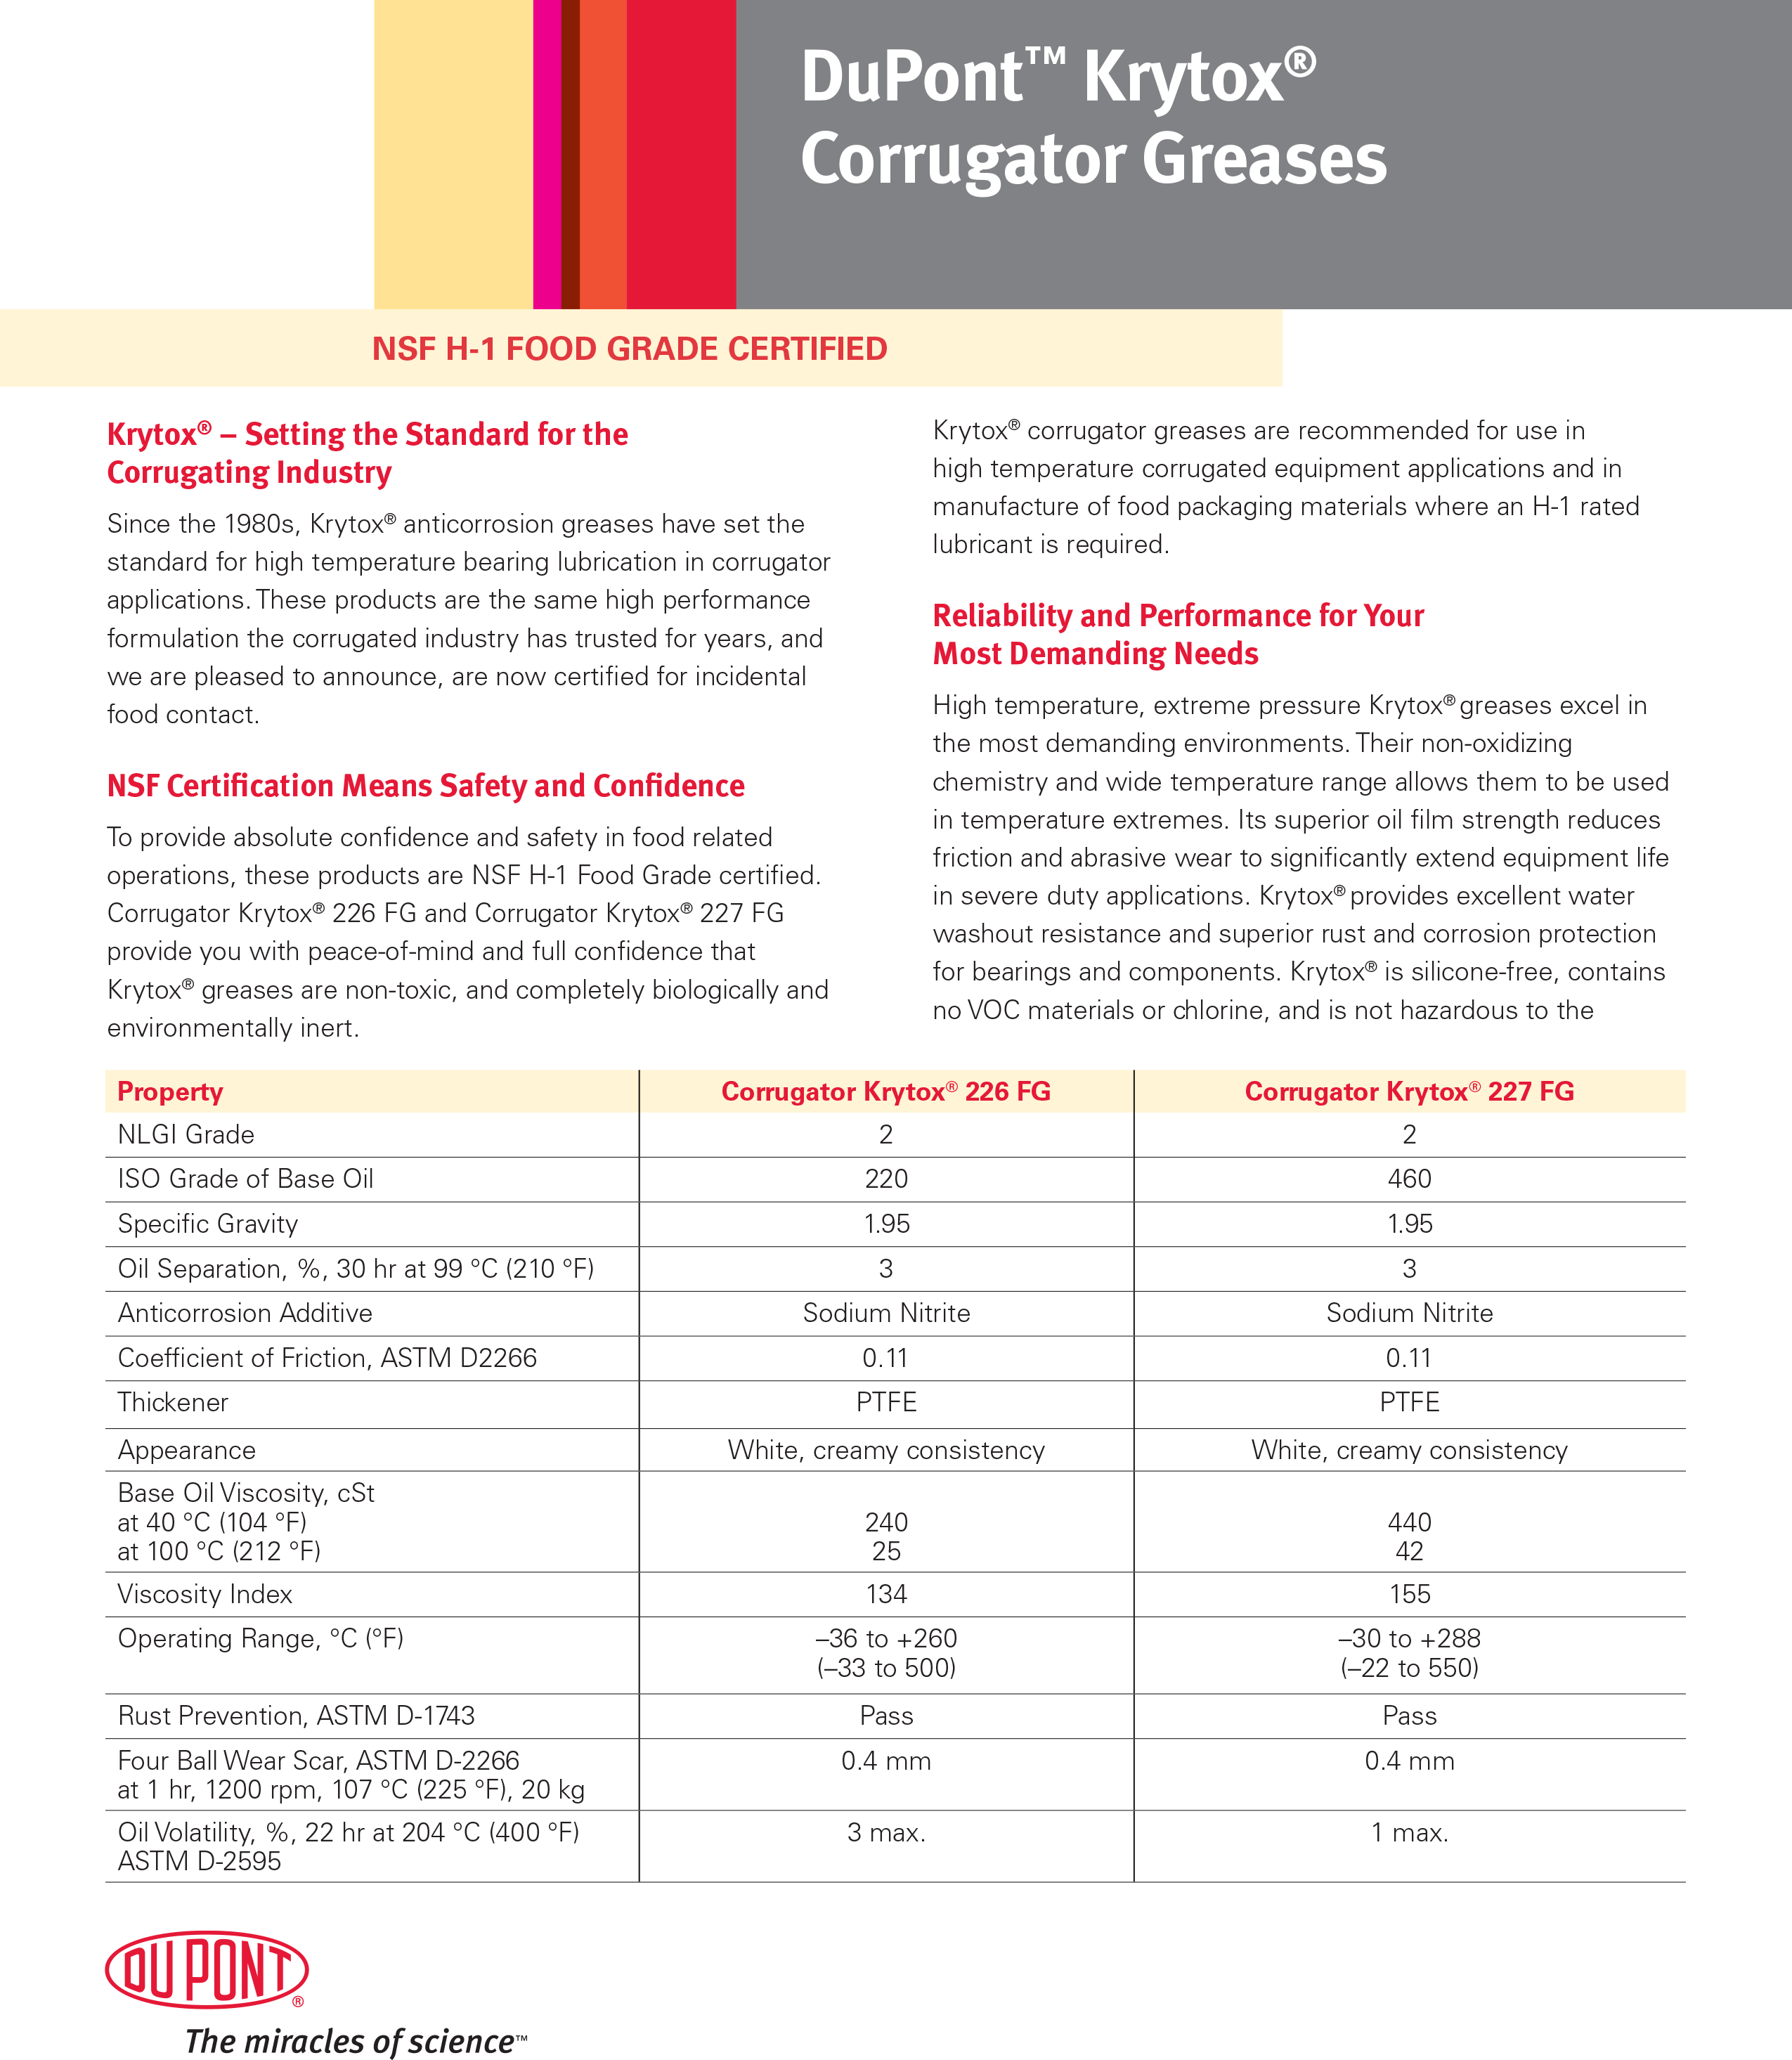 Learn more about DuPont™ Krytox® NSF H-1 Food Grade Certified greases in the Corrugator Greases brochure. 